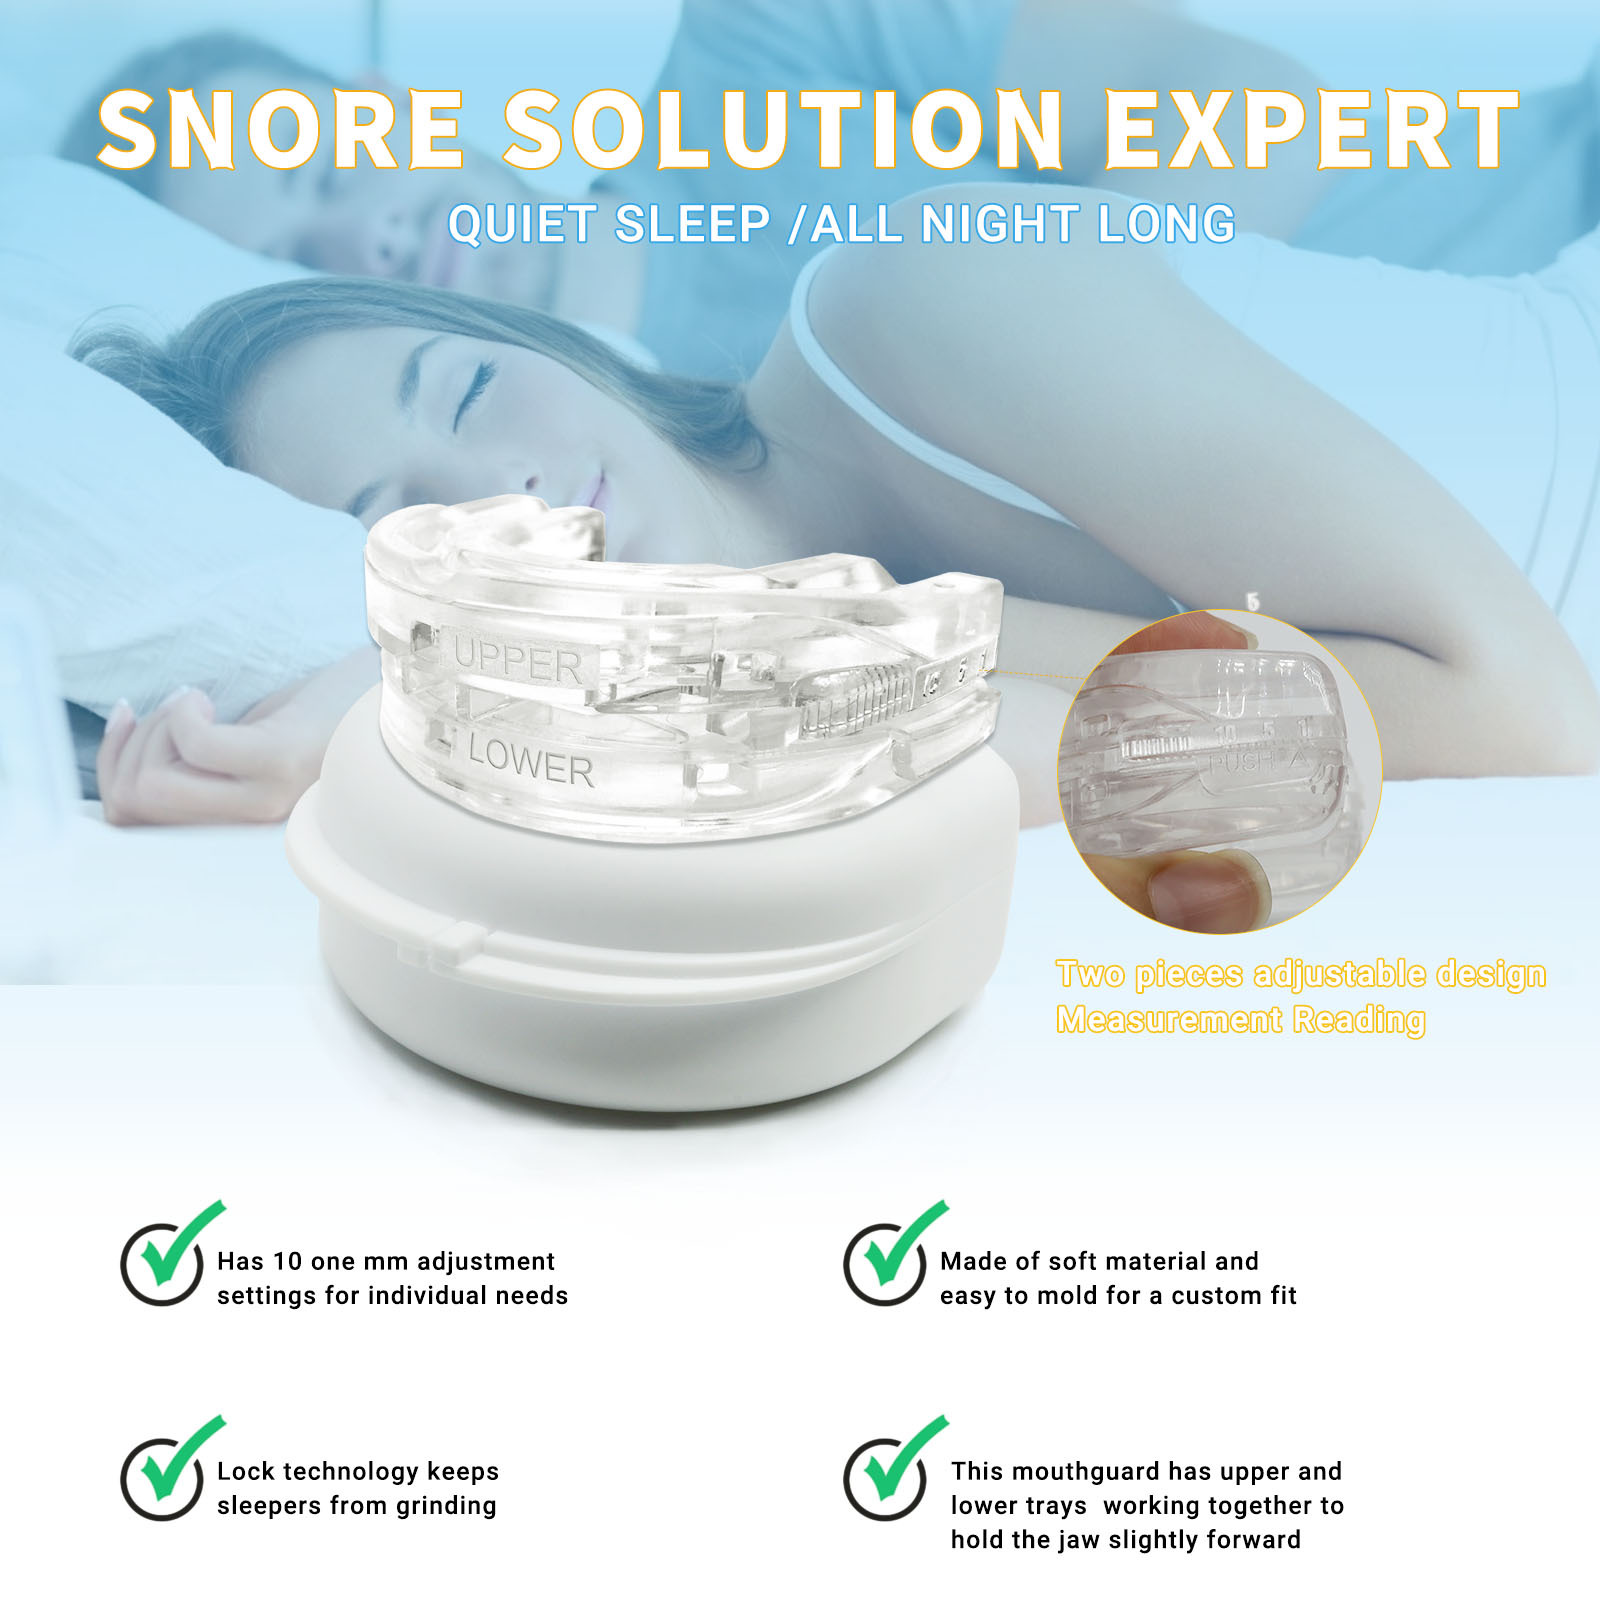 Combat snoring with our Adjustable Braces Mouthpiece—max comfort, minimal noise for a restful night's sleep! image 6